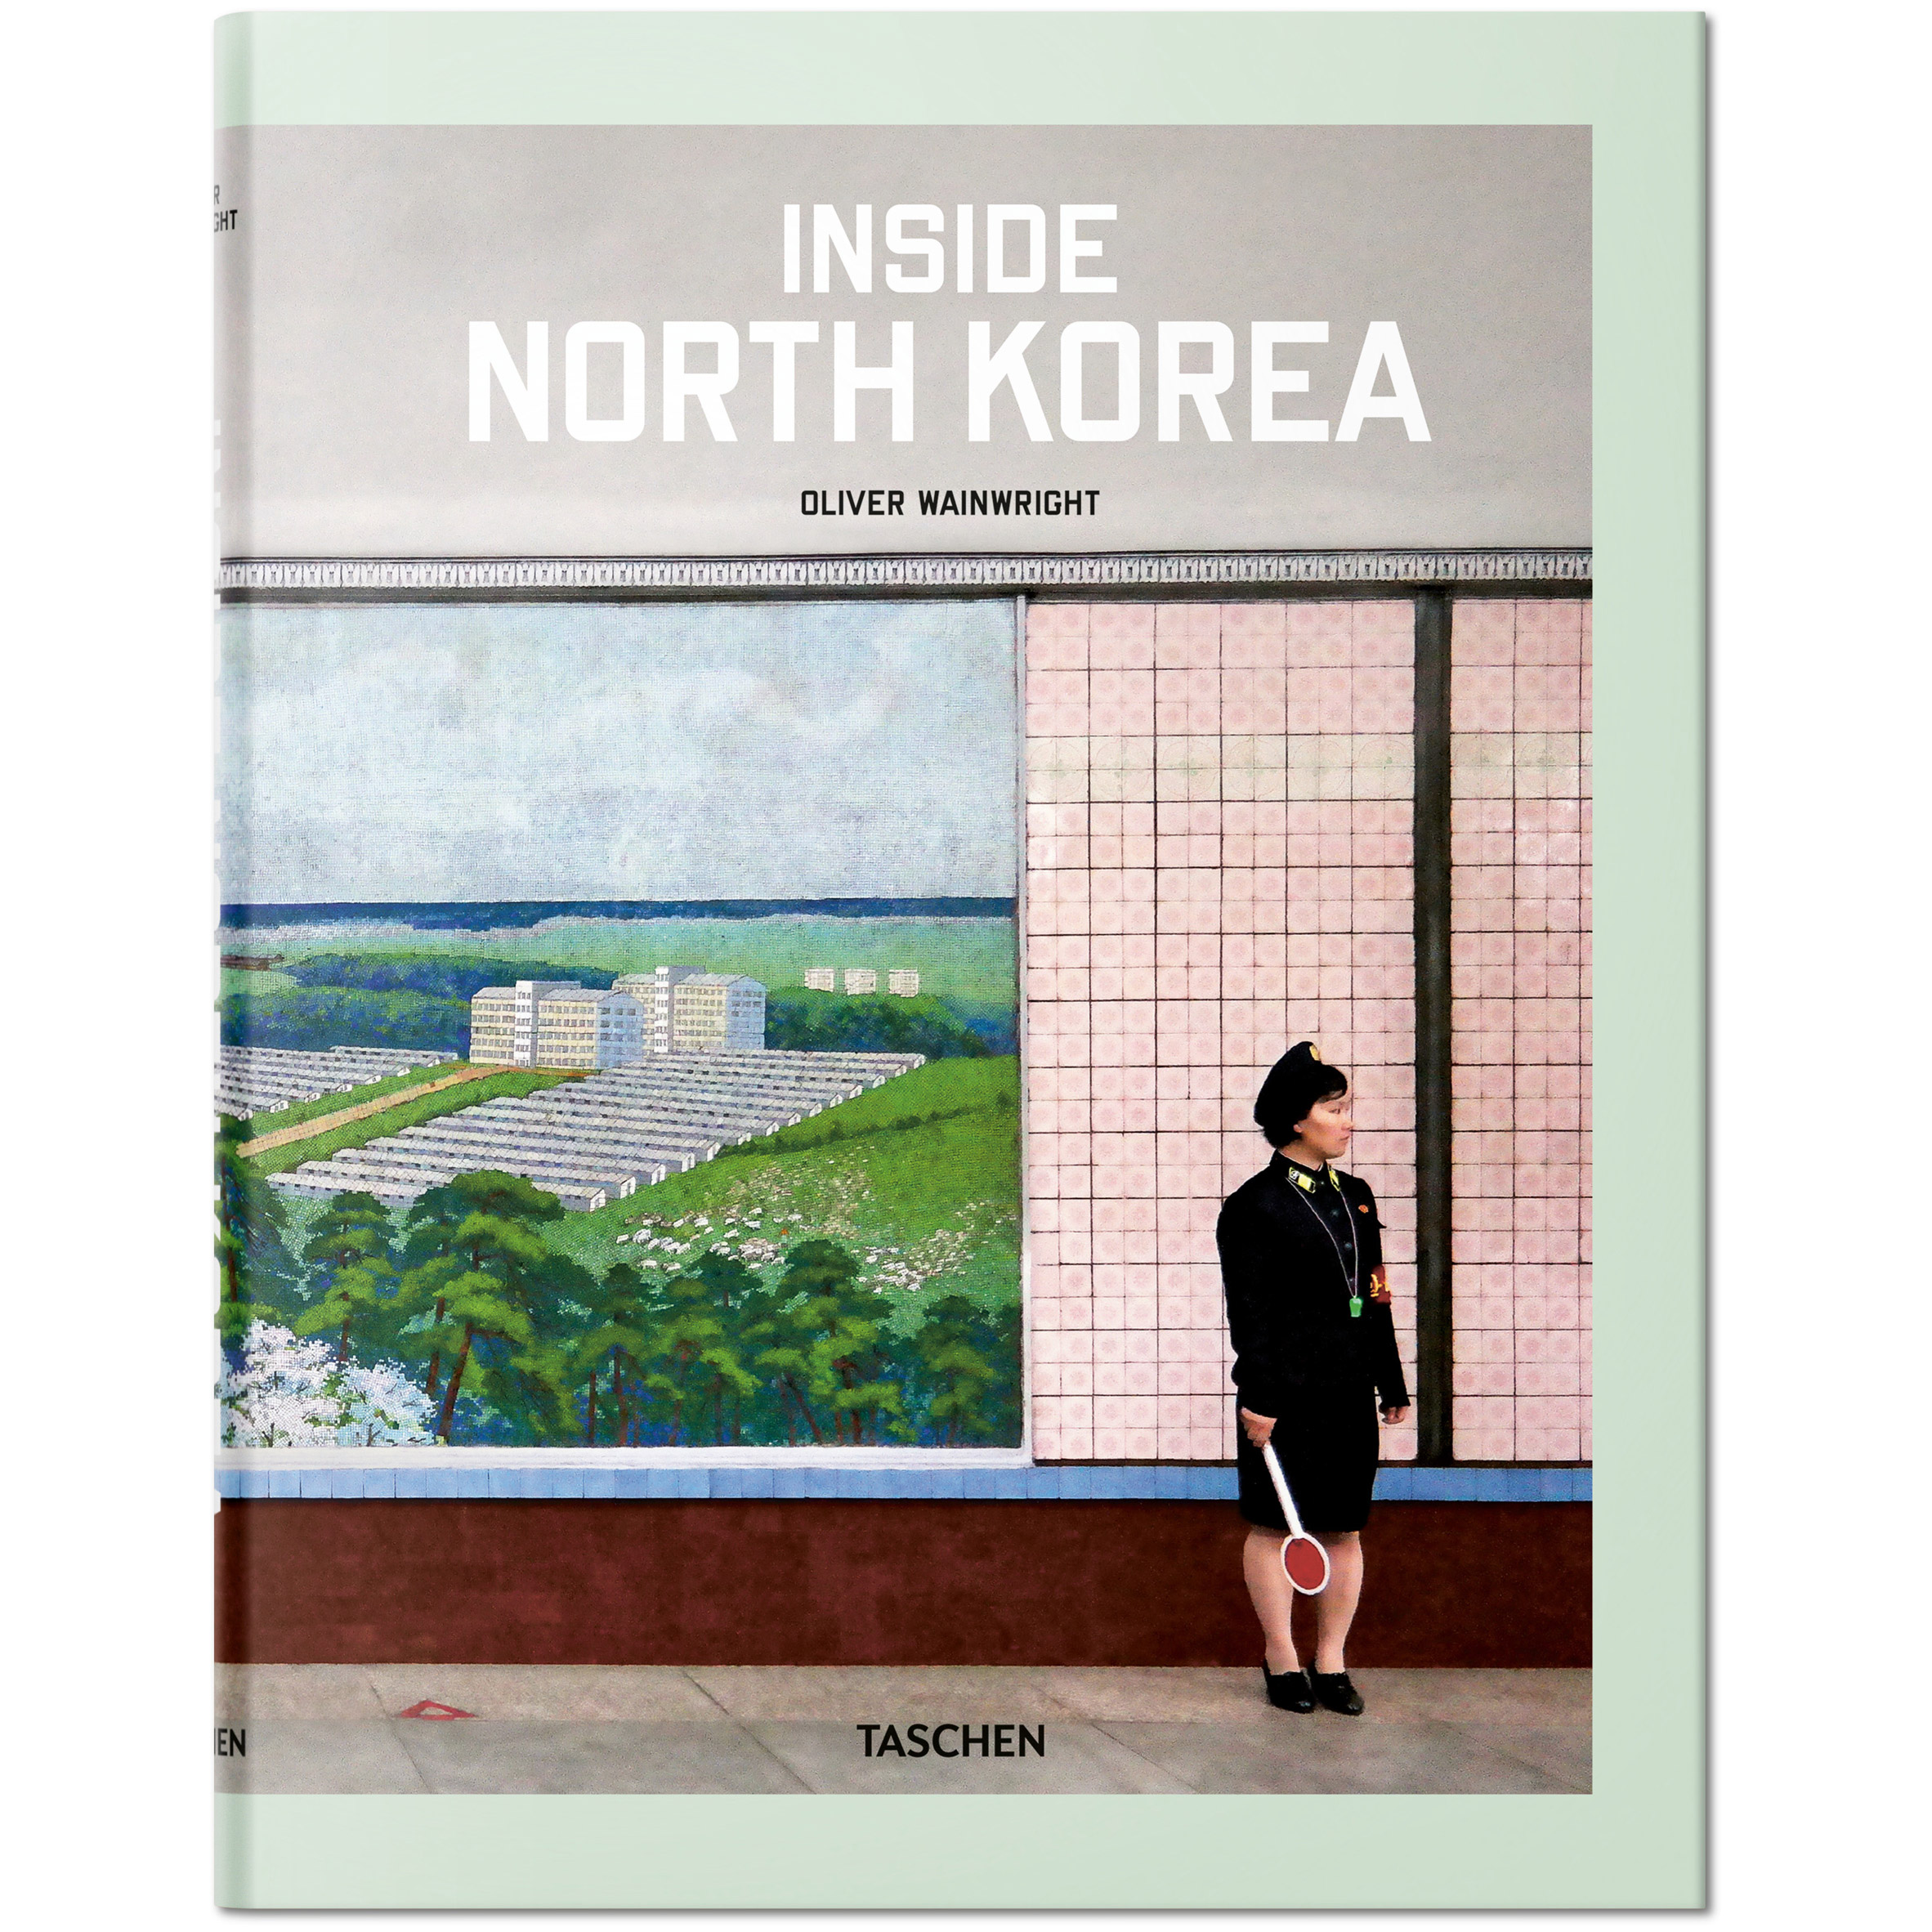 Christmas 2018 gifts for architects and designers: Inside North Korea by Oliver Wainwright, published by Taschen